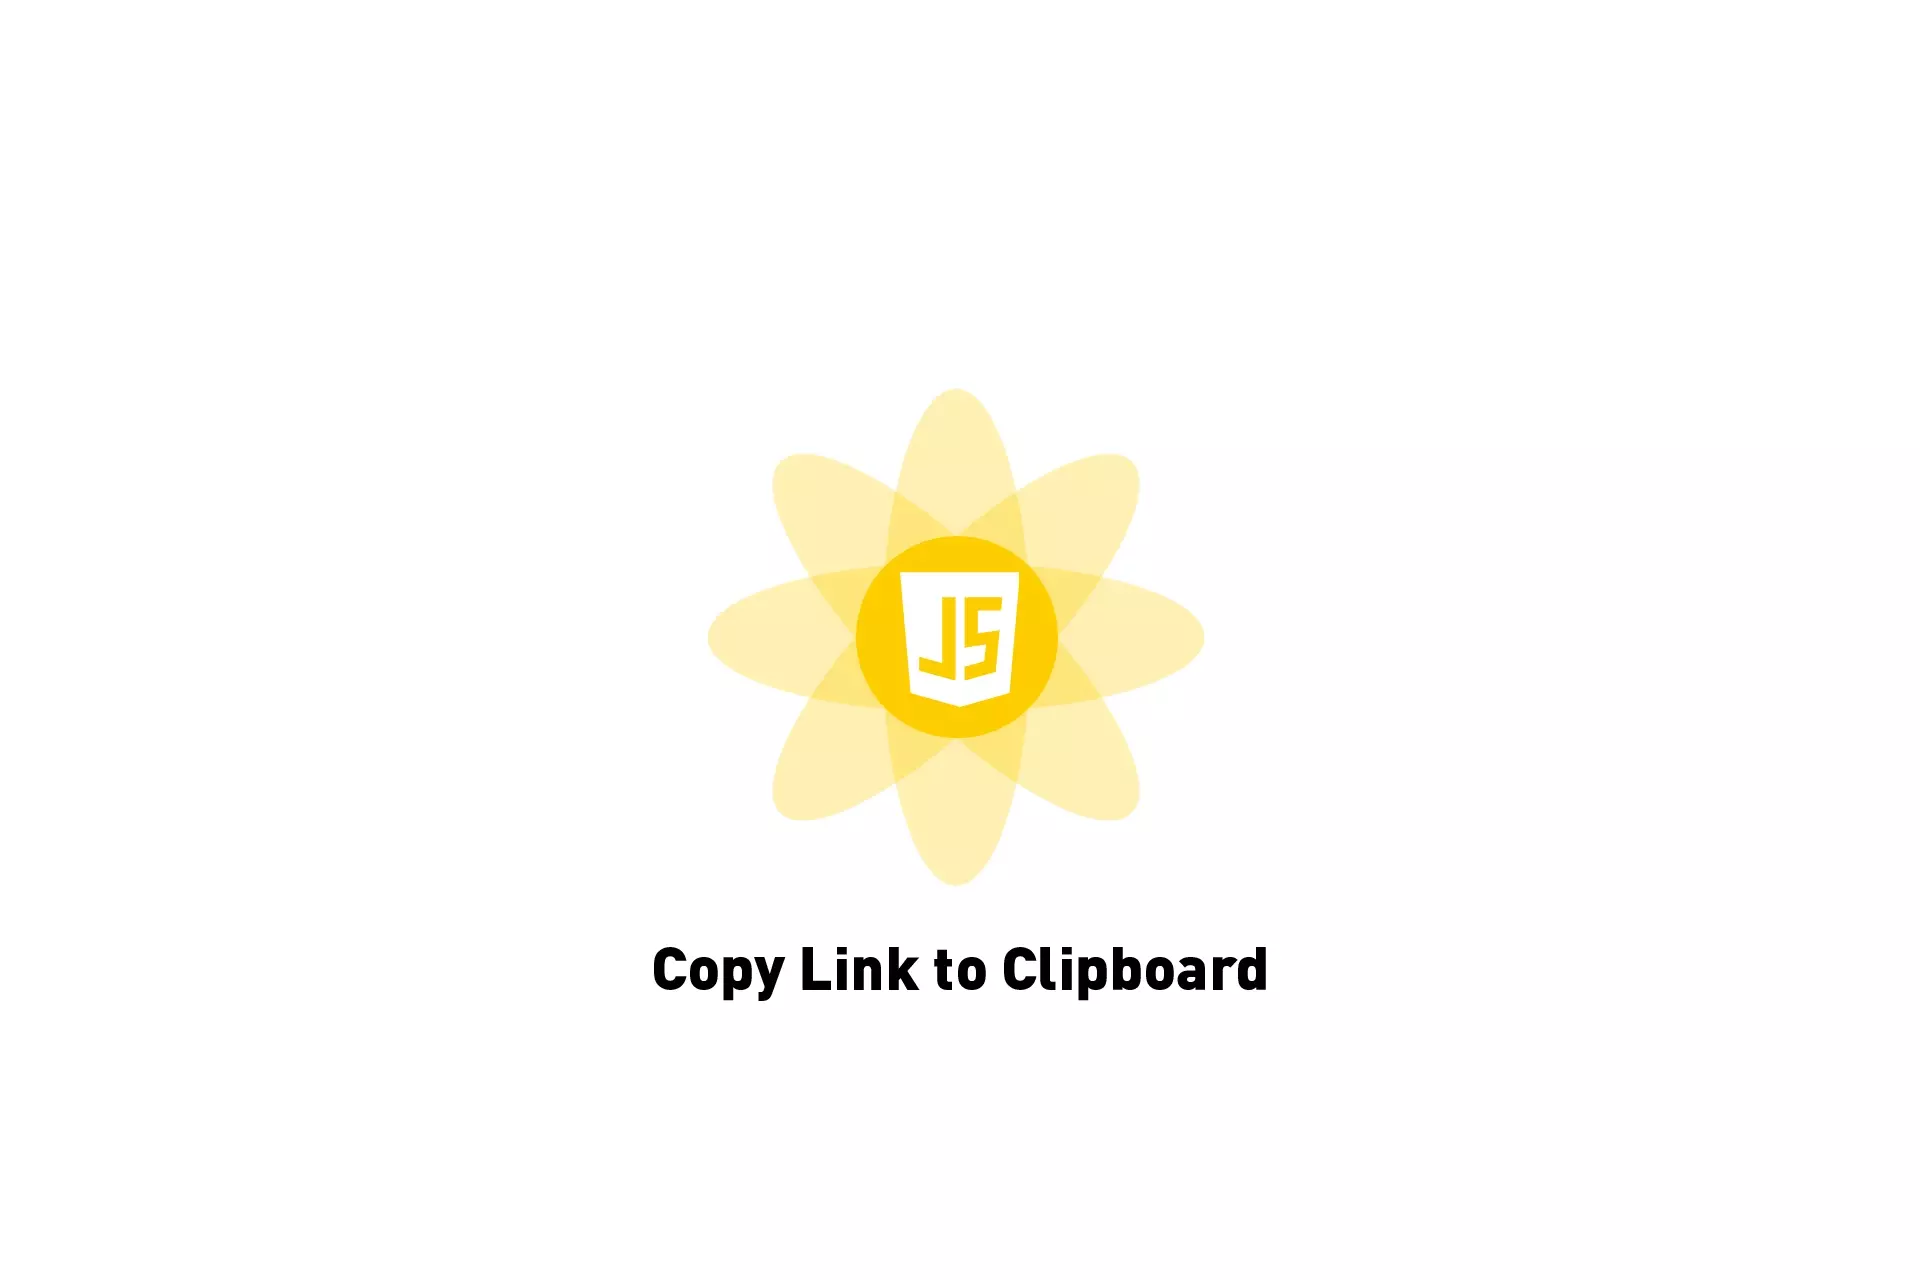 A flower that represents Javascript with the text "Copy Link to Clipboard" beneath it.